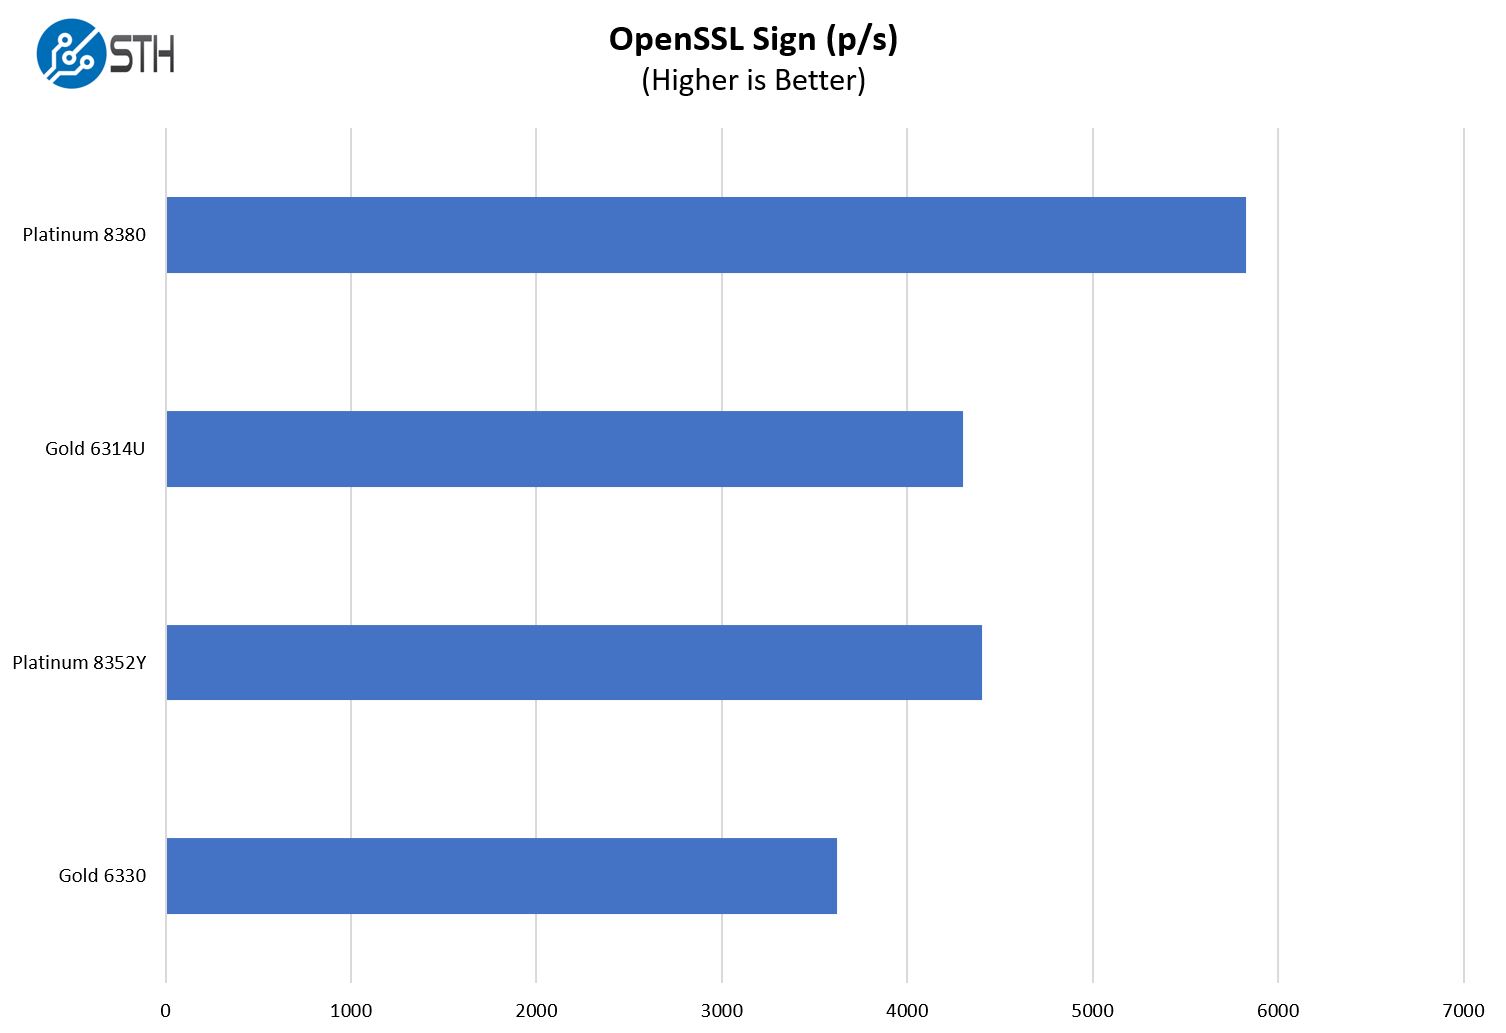 Supermicro SYS 510P WTR OpenSSL Sign Benchmark